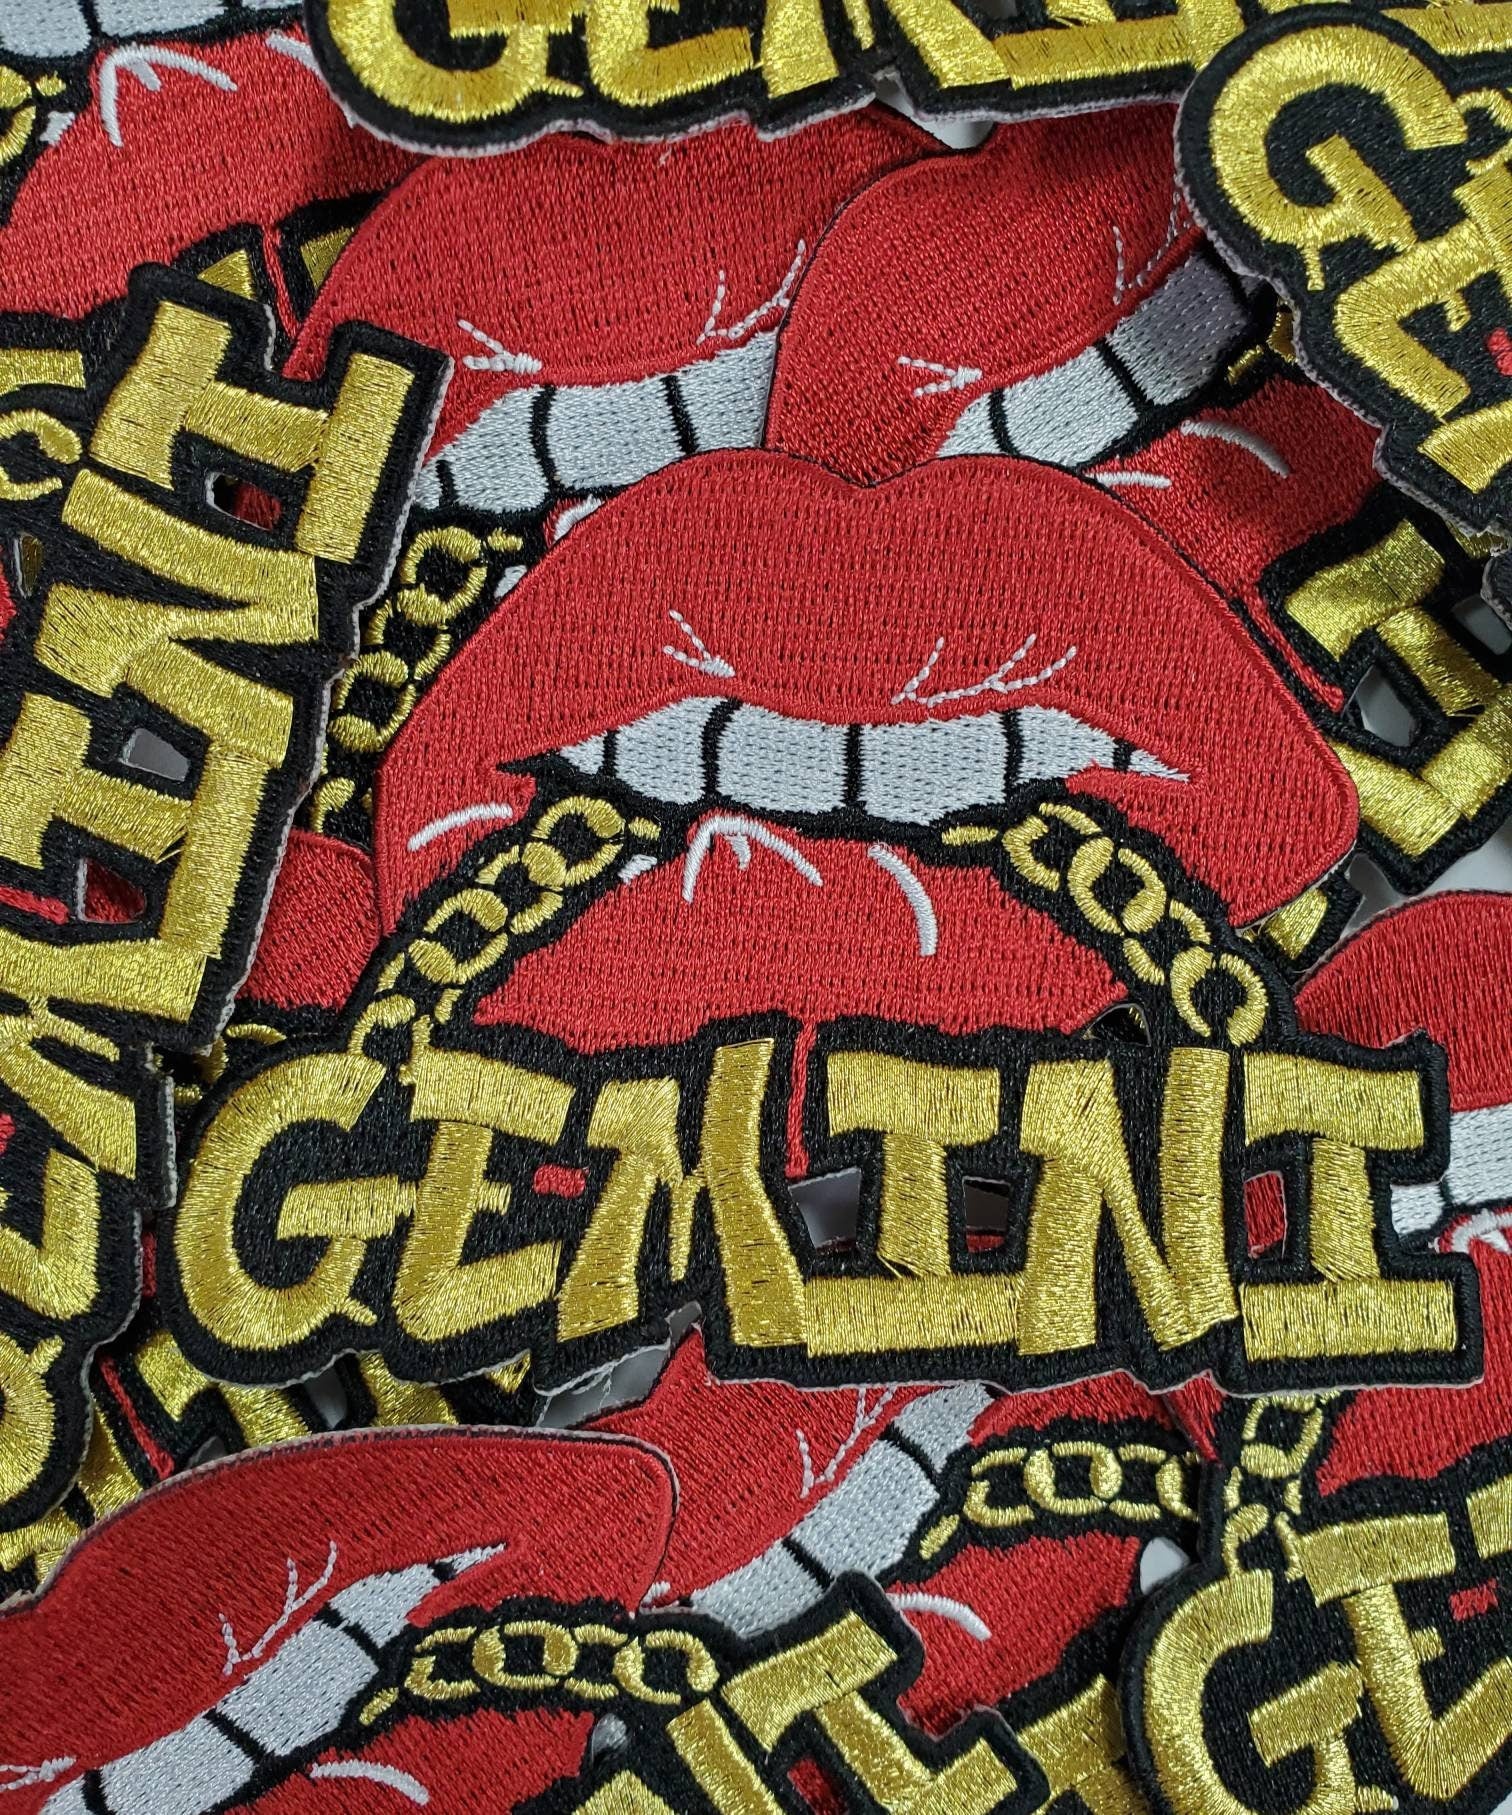 Poppin' Red Lip "Gemini" w/Gold Metallic Chain|Iron-On Patch|Astrology Applique|Cool Embroidered Patch|DIY Patch for Denim & Accessories